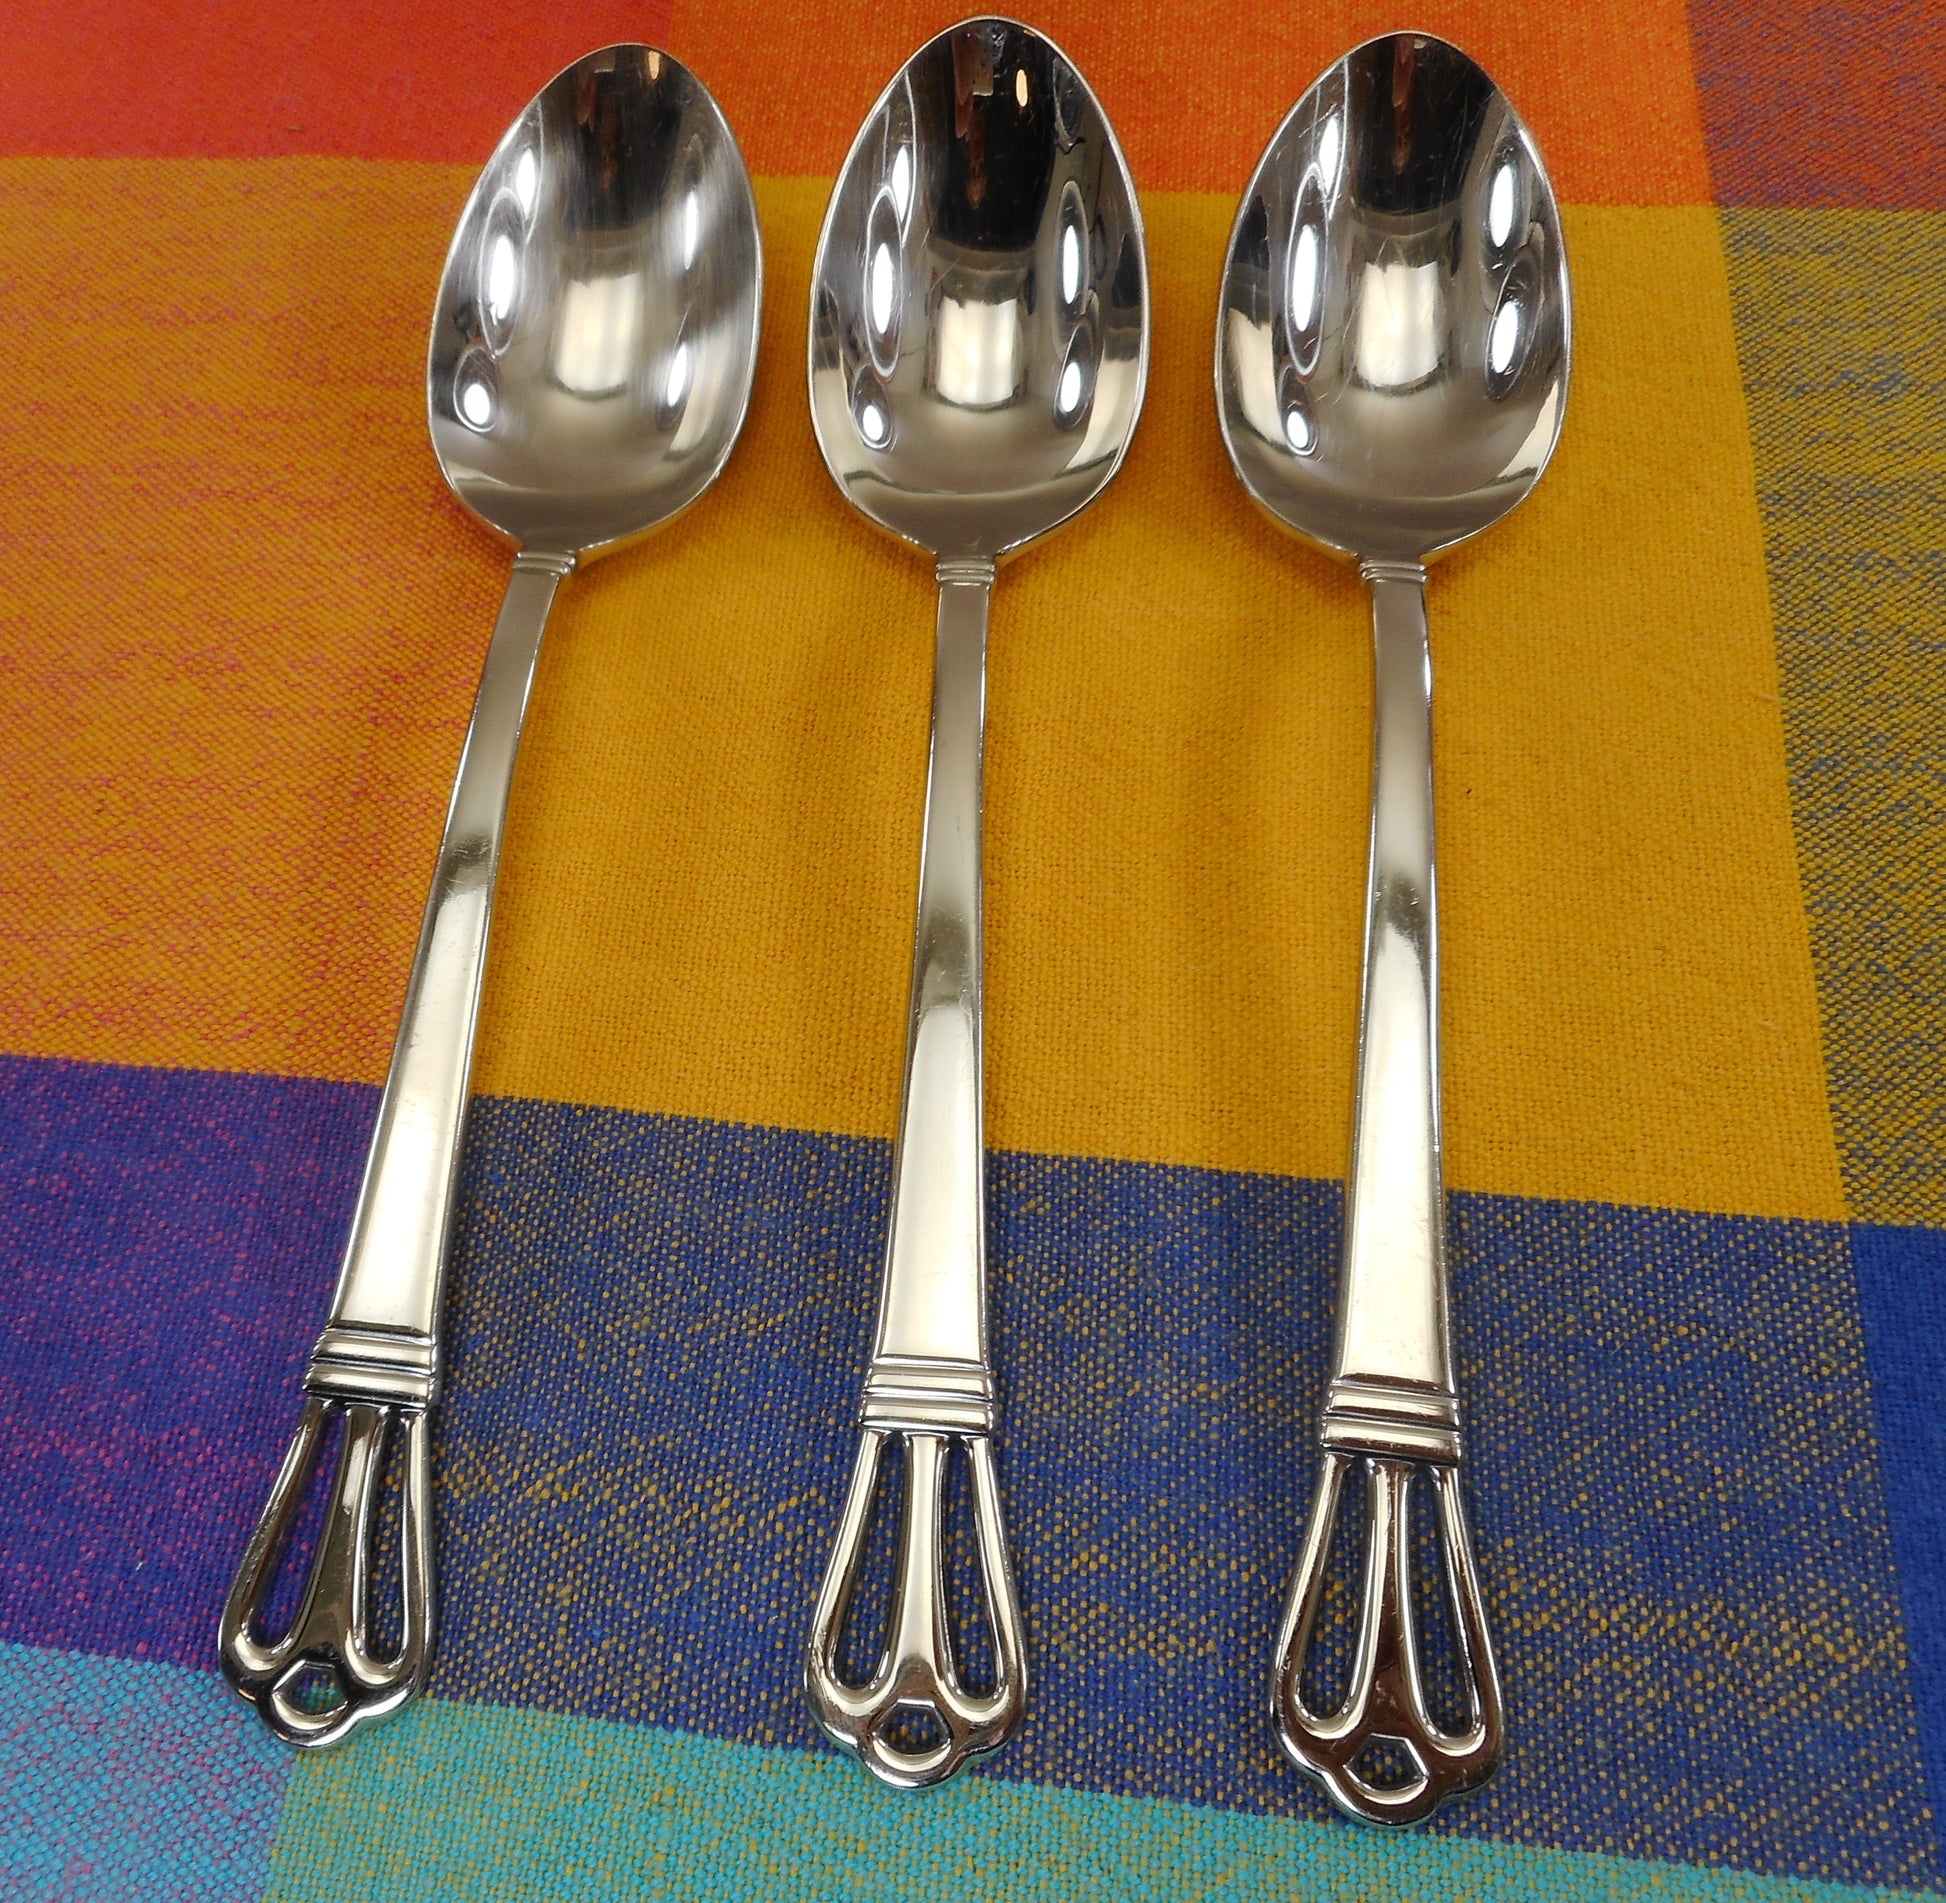 Gorham Japan Chancellor 18/8 Stainless Flatware - 3 Place Spoons